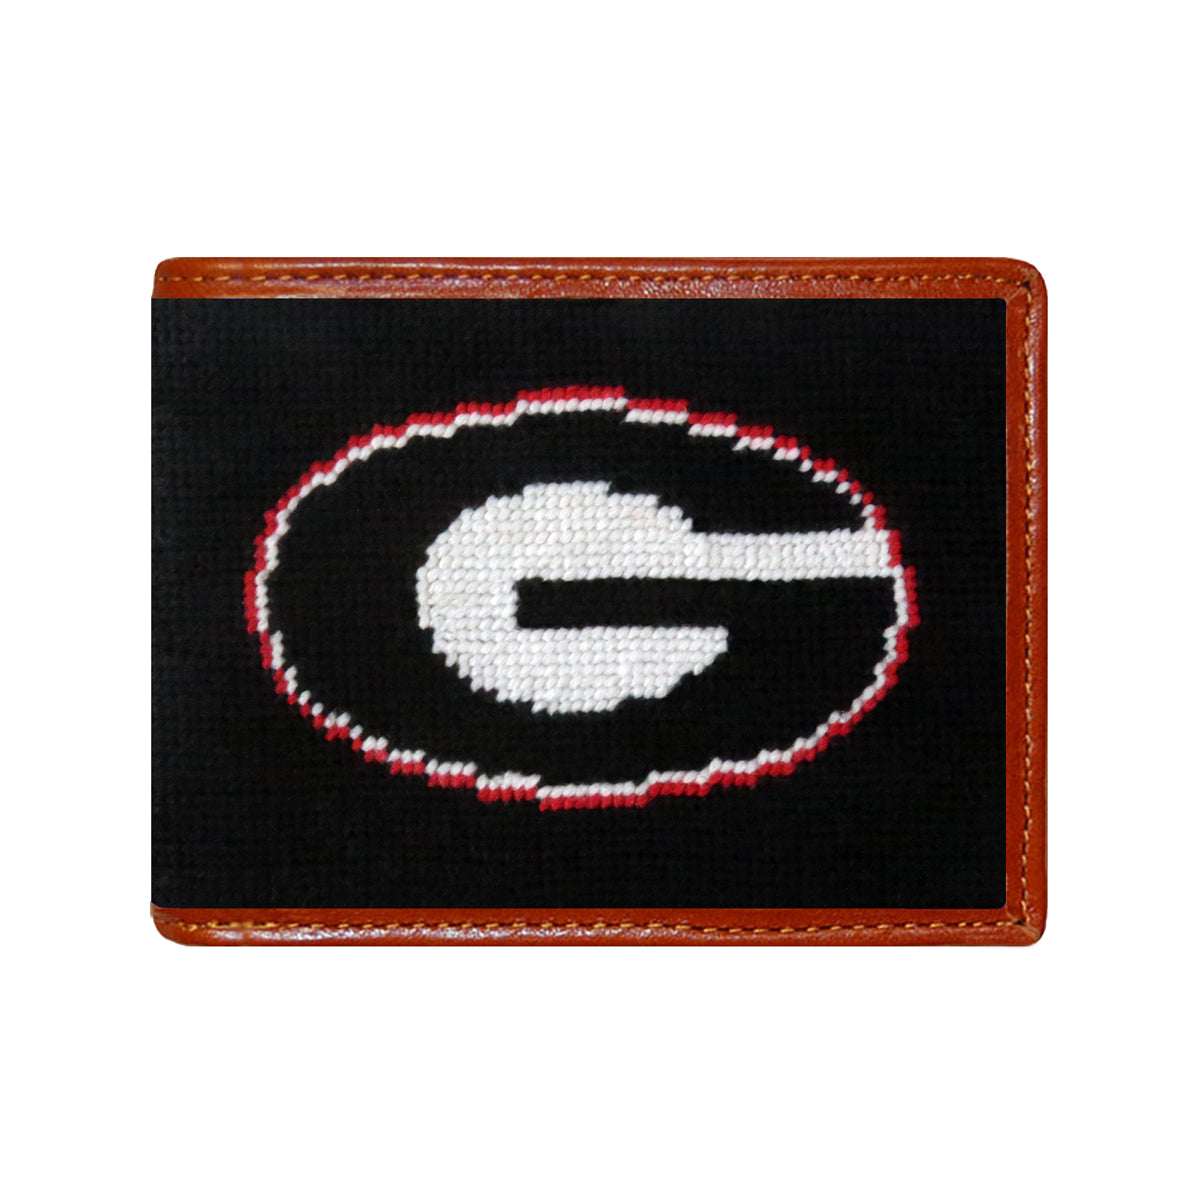 Georgia Needlepoint Wallet in Black by Smathers & Branson - Country Club Prep